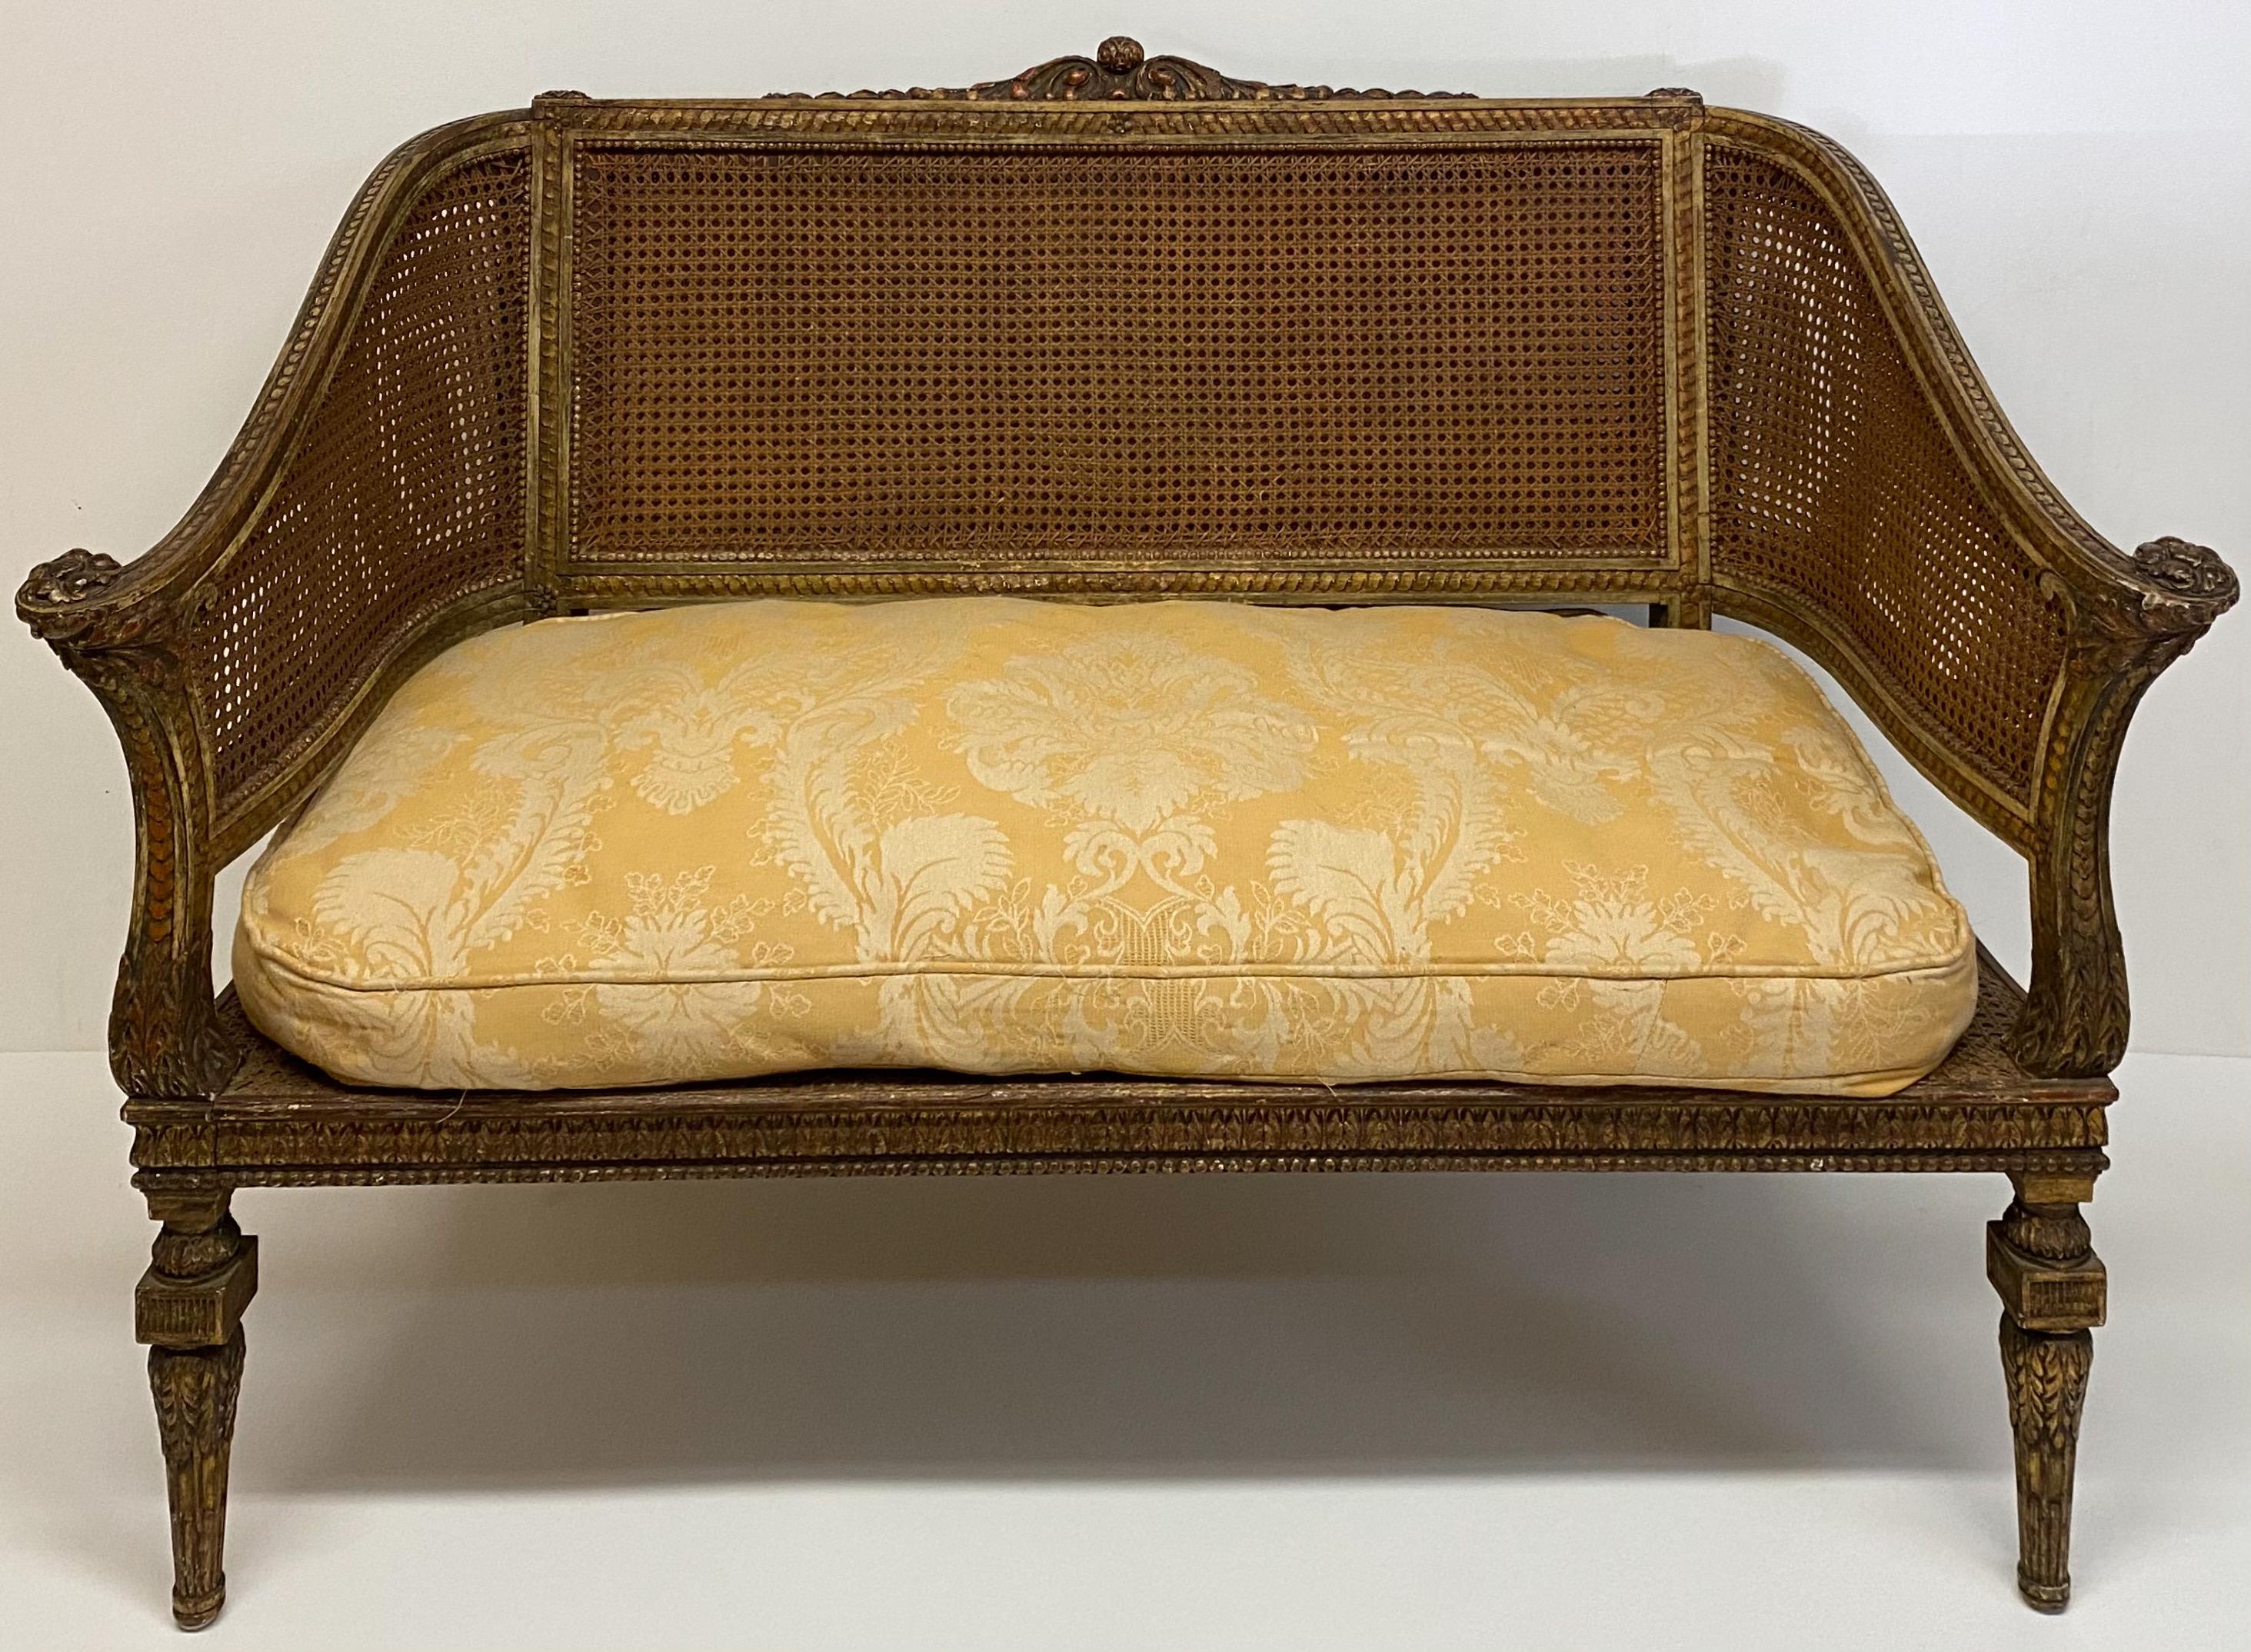 This is a wonderful piece! It is a French Napoleonic double caned and giltwood settee. The cane condition is marvelous with no pokes or tears. The down cushion is vintage and a damask raw silk. The patina is enhanced with the sloping carved giltwood